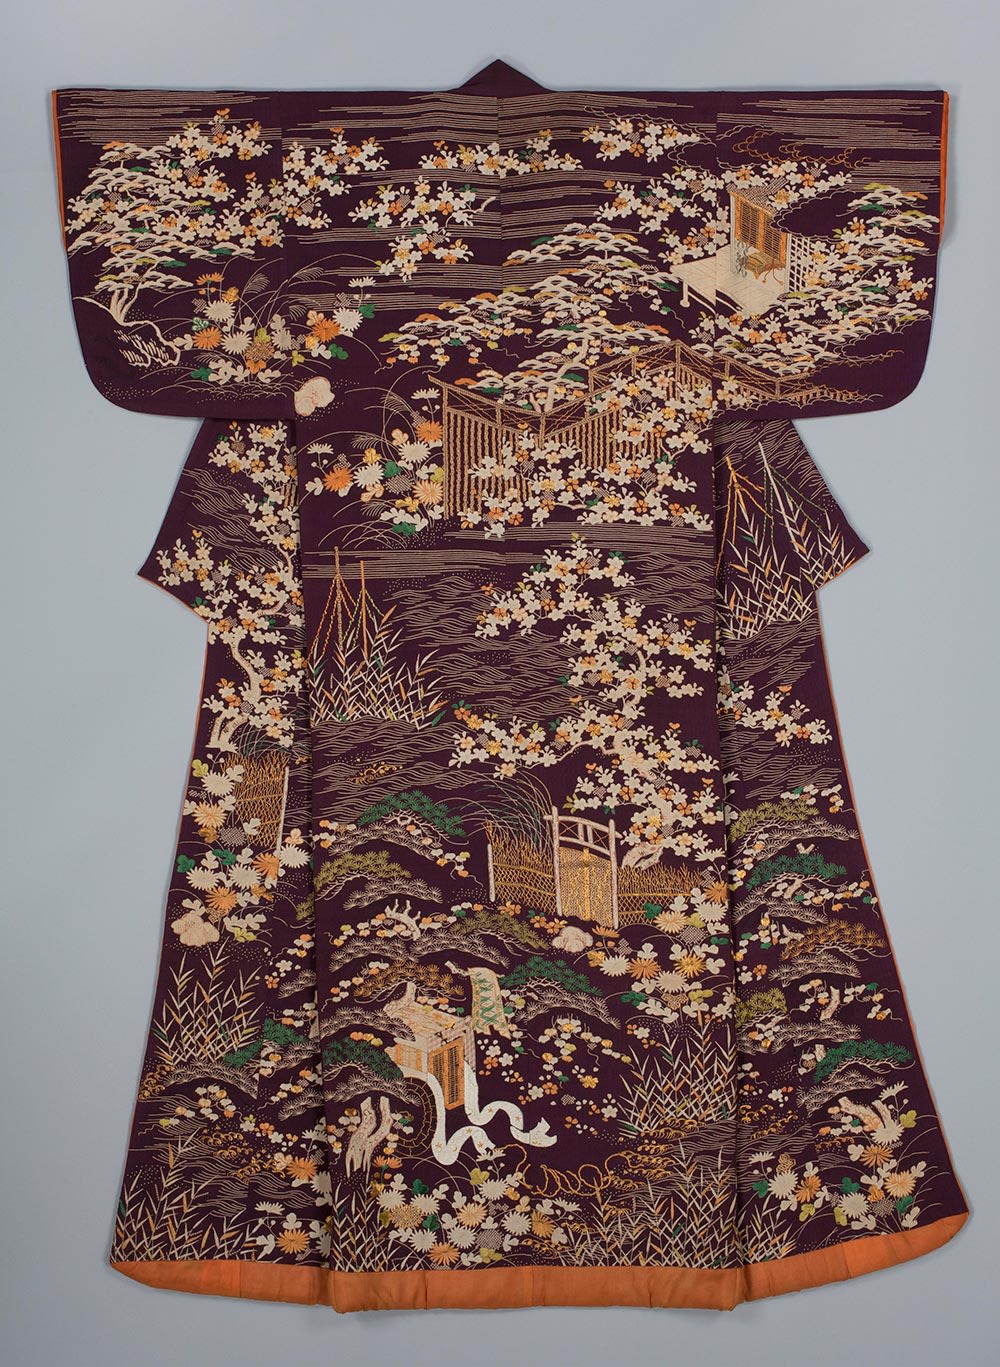 colour photograph of a brown kimono with a design showing a landscape with pavilion, gateway, fishing nets and nobleman’s cart